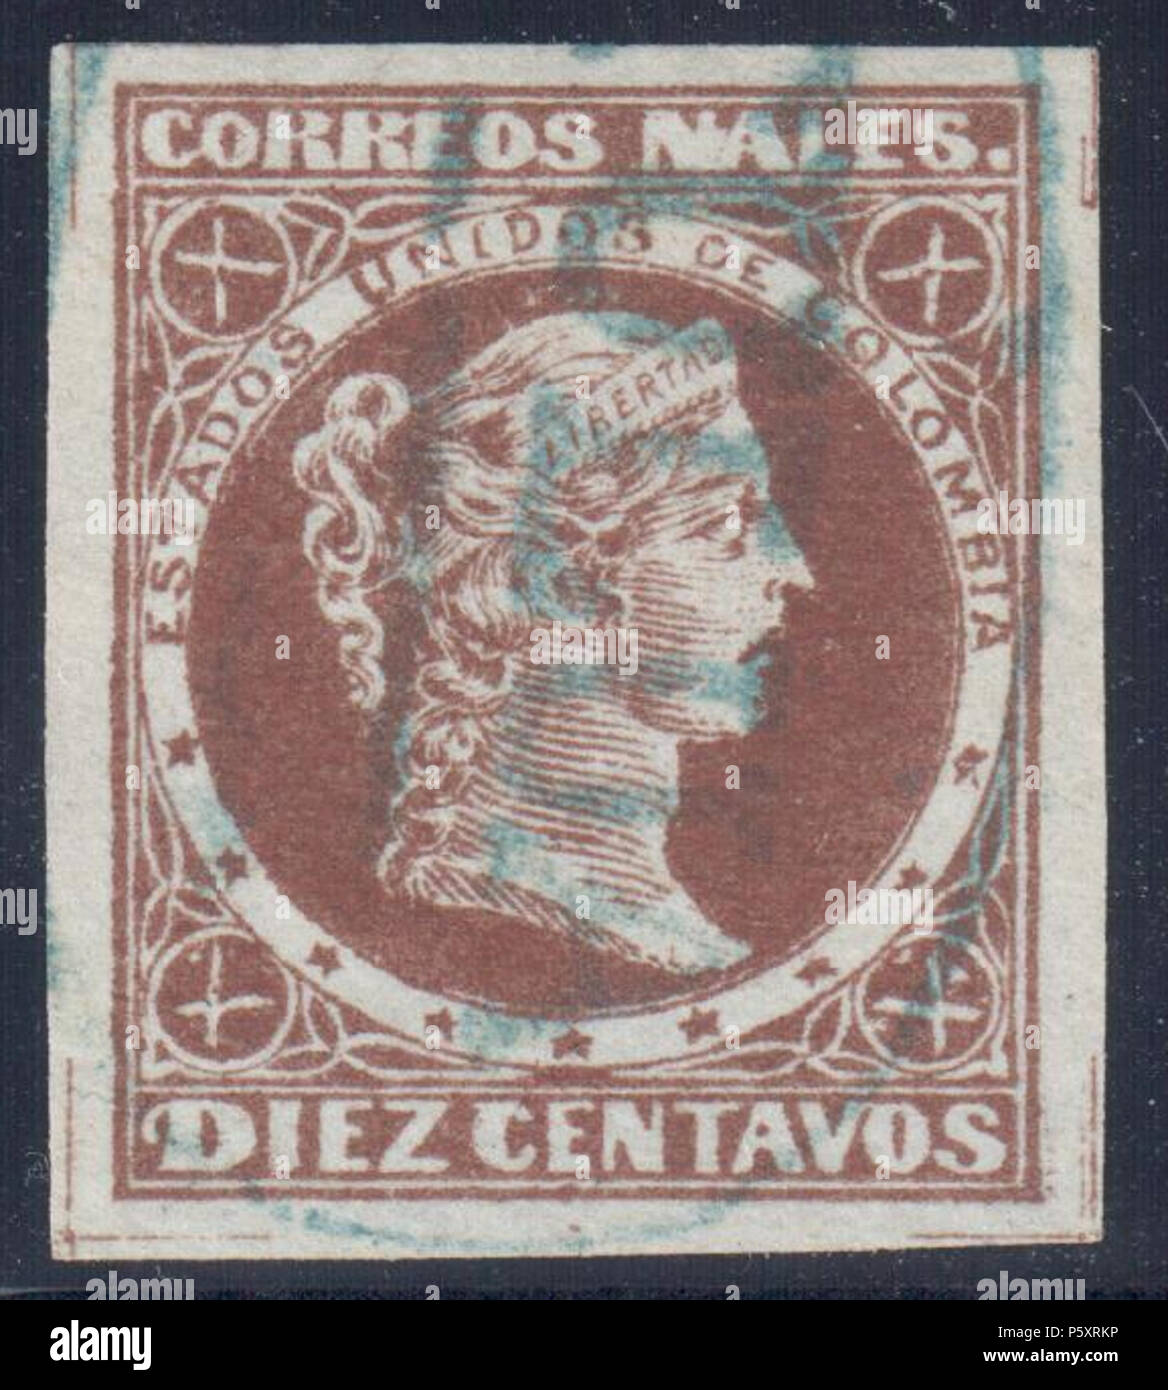 N/A. English: Colombia 10c brown, bluish paper, used oval '(T)uluá. Signed. Catalogue: Sc. 94, Mi. 63z Paper: Bluish wove unwtmk Perforation: imperforate Printing: Lithography Printer: Ayala Medrano Printing Ltd, Bogota . 1881. Colombian government 367 Colombia 1881 Sc94u Stock Photo